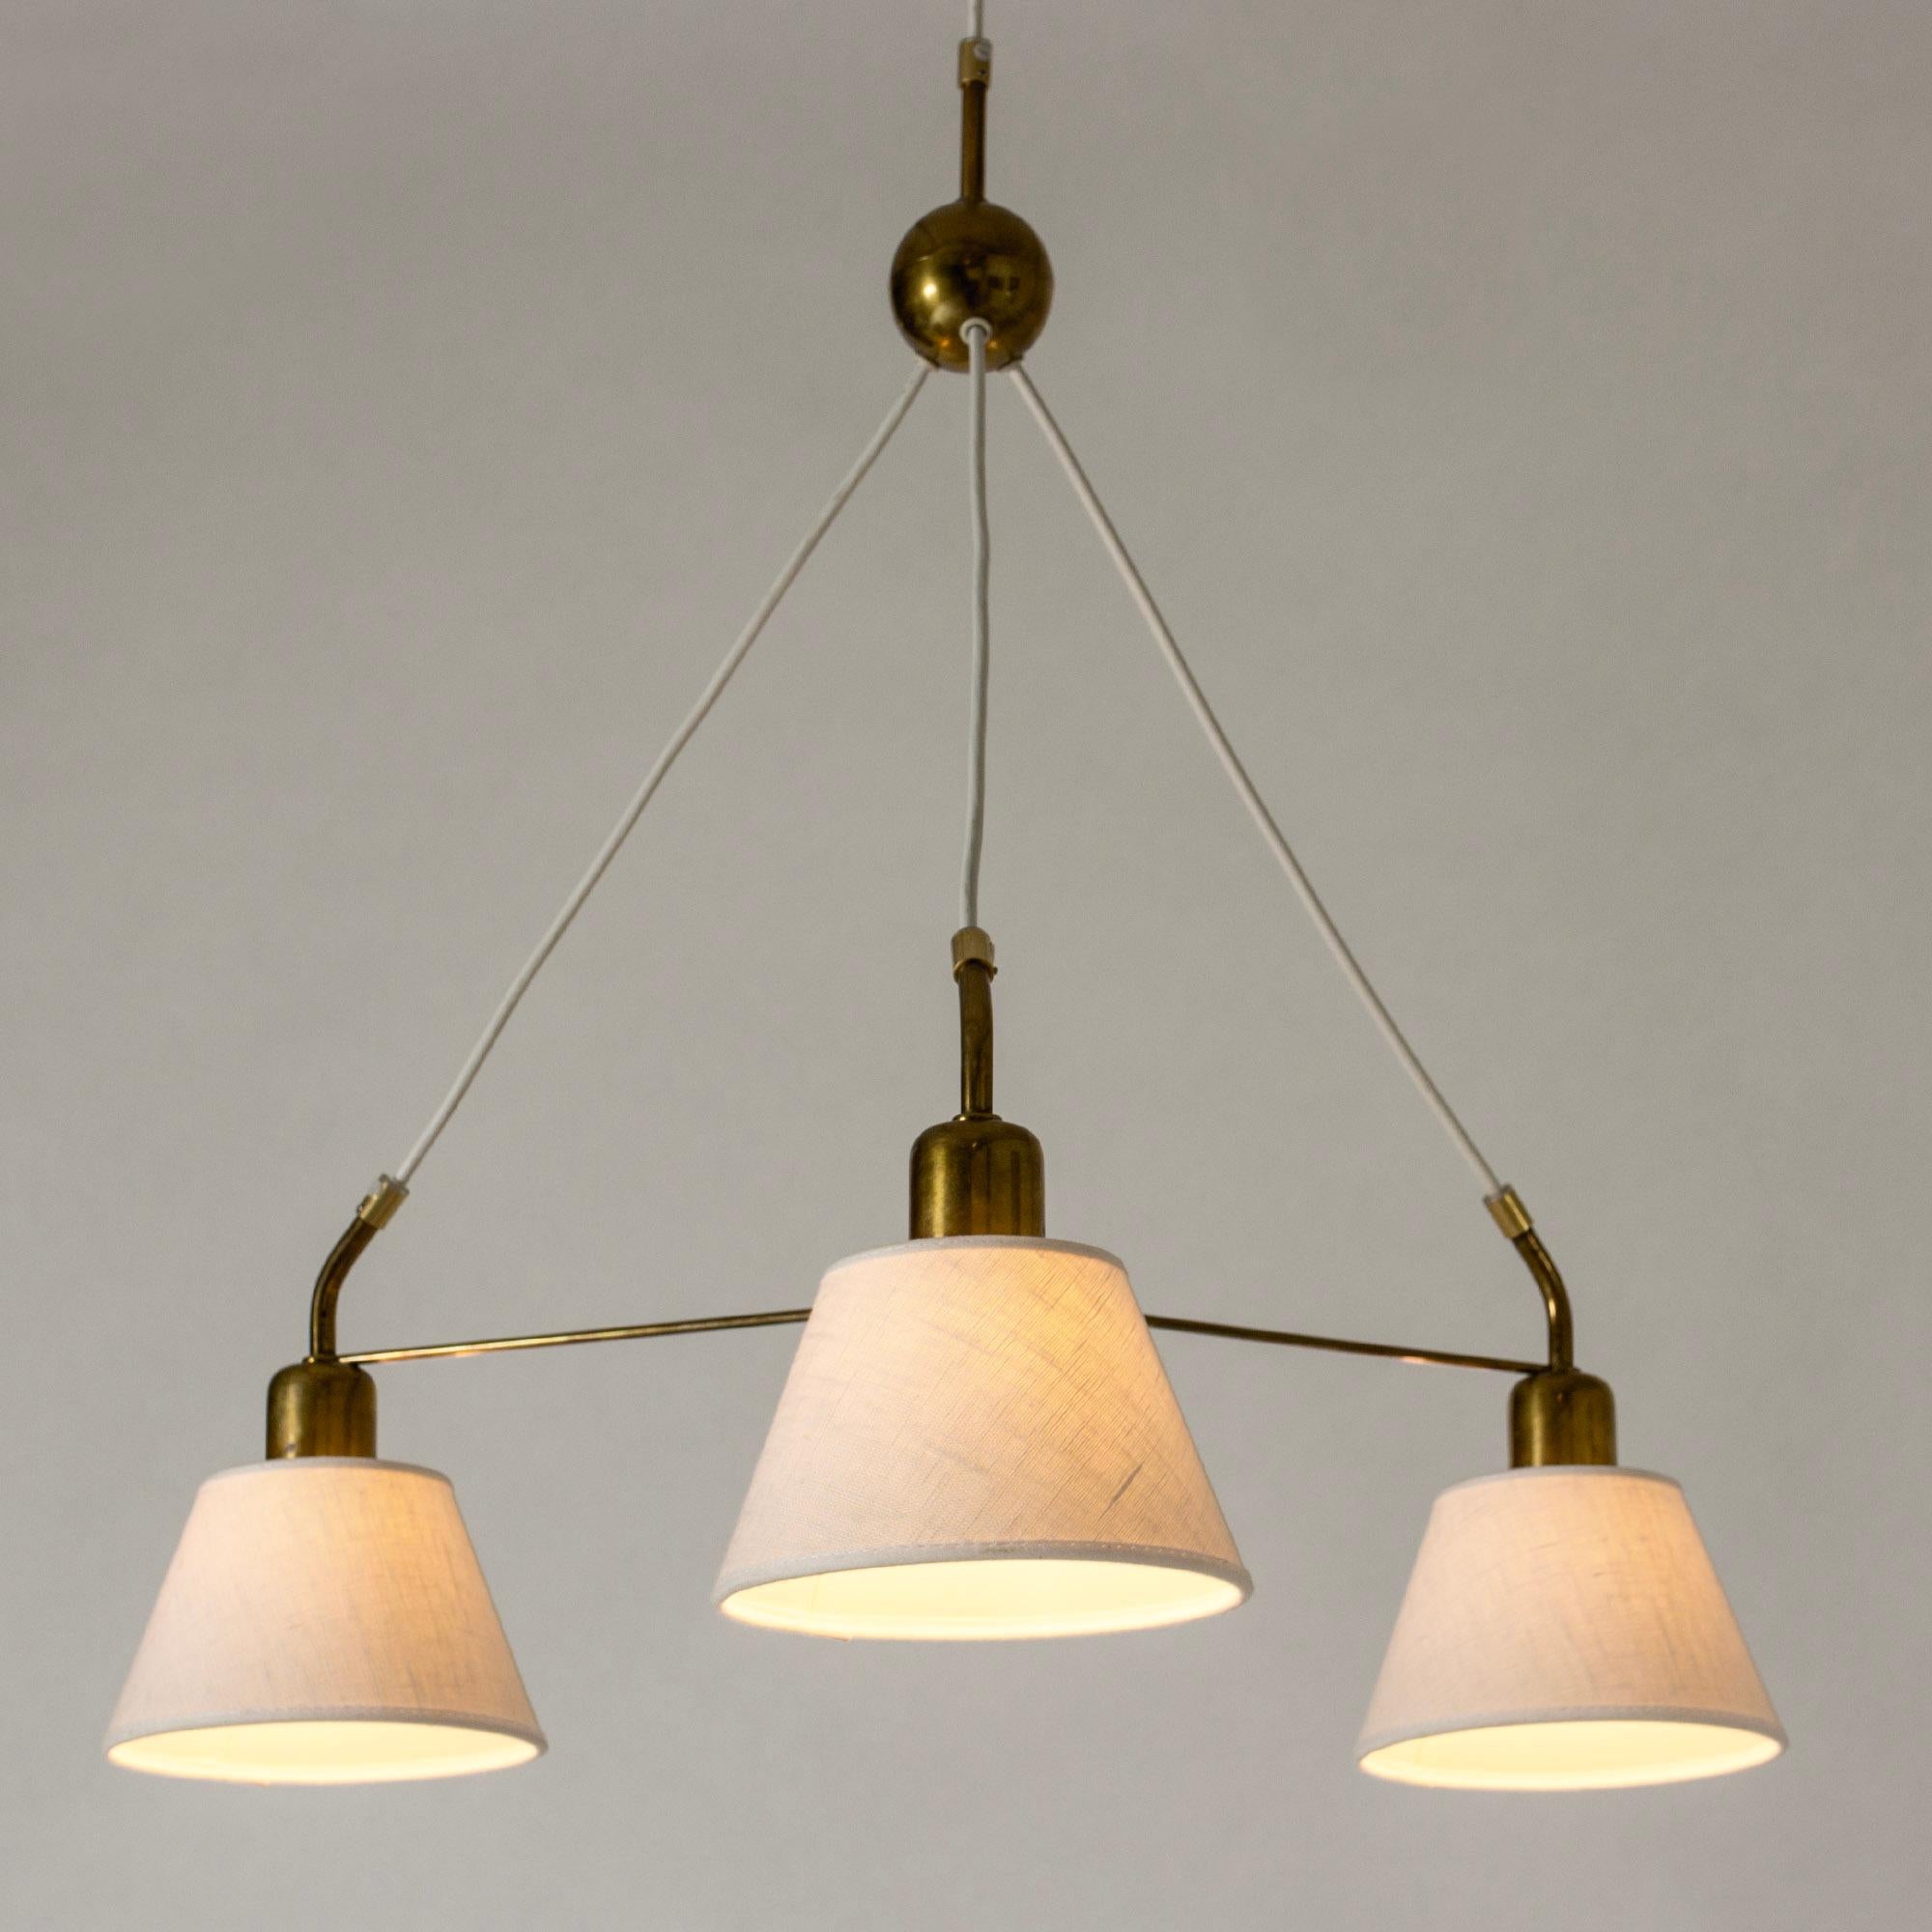 Elegant brass pendant light by Josef Frank, with three shades. Slender brass frame and decorative brass ball on the chord.

Length of chord is adjustable according to preference.